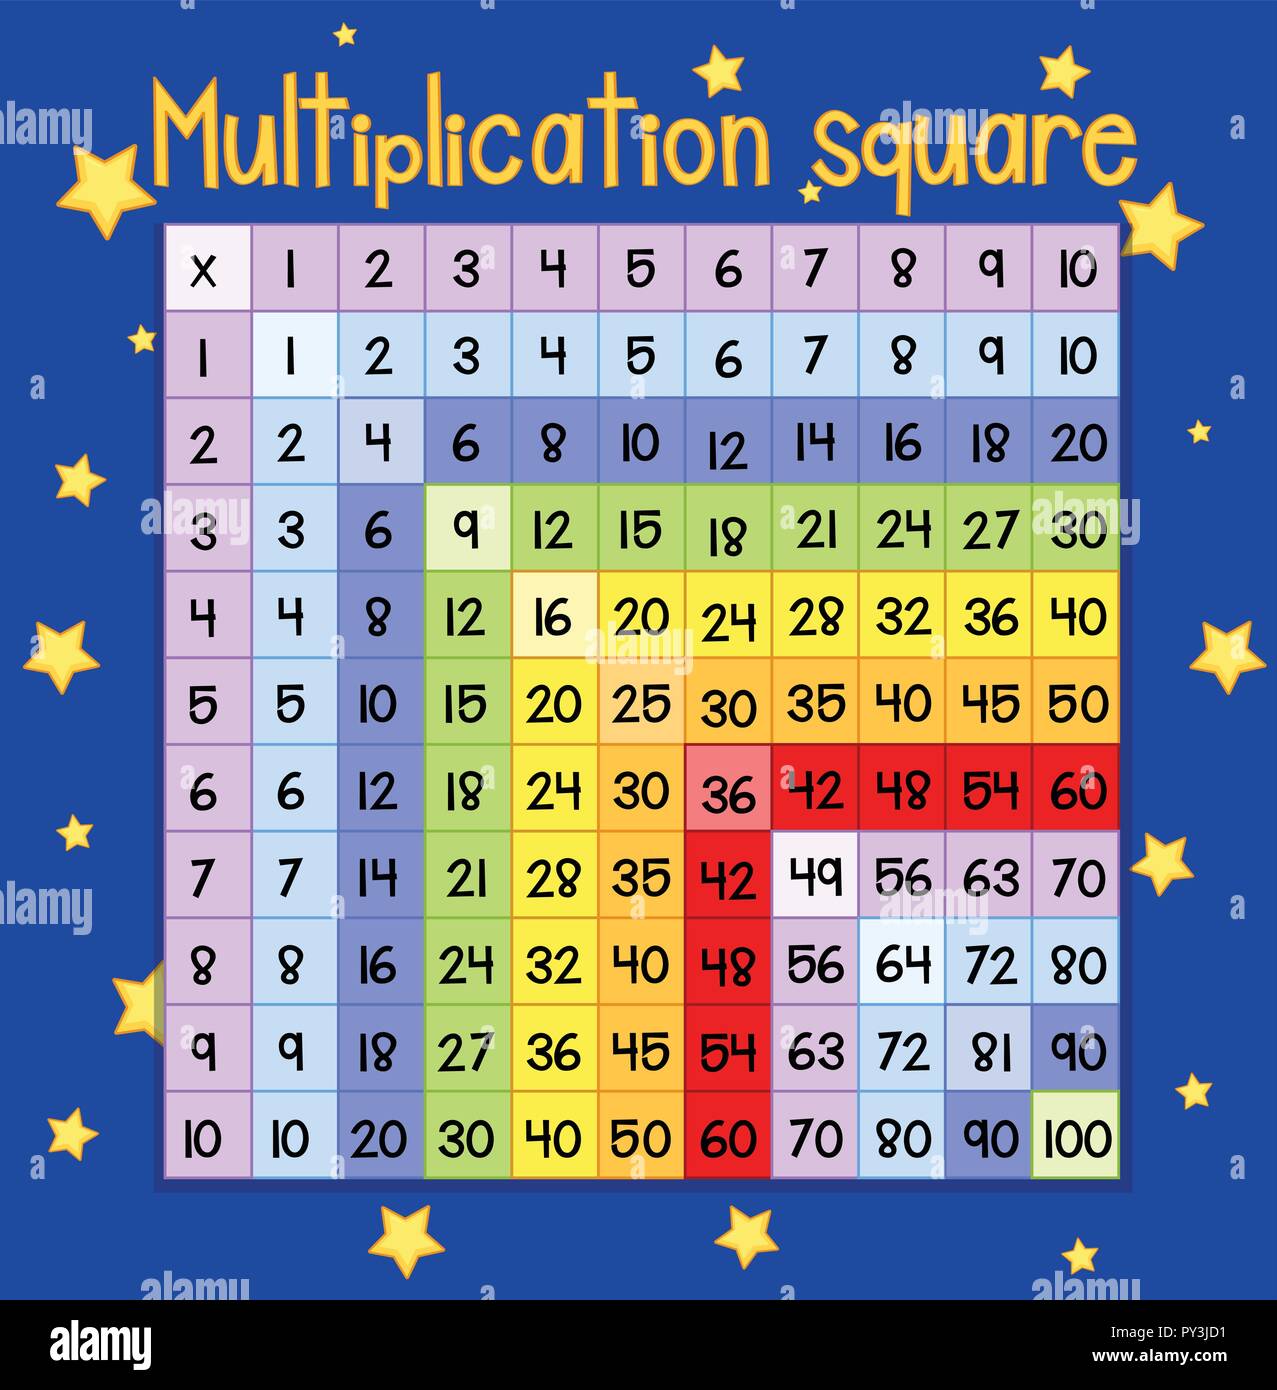 Colorful Multiplication square poster illustration Stock Vector